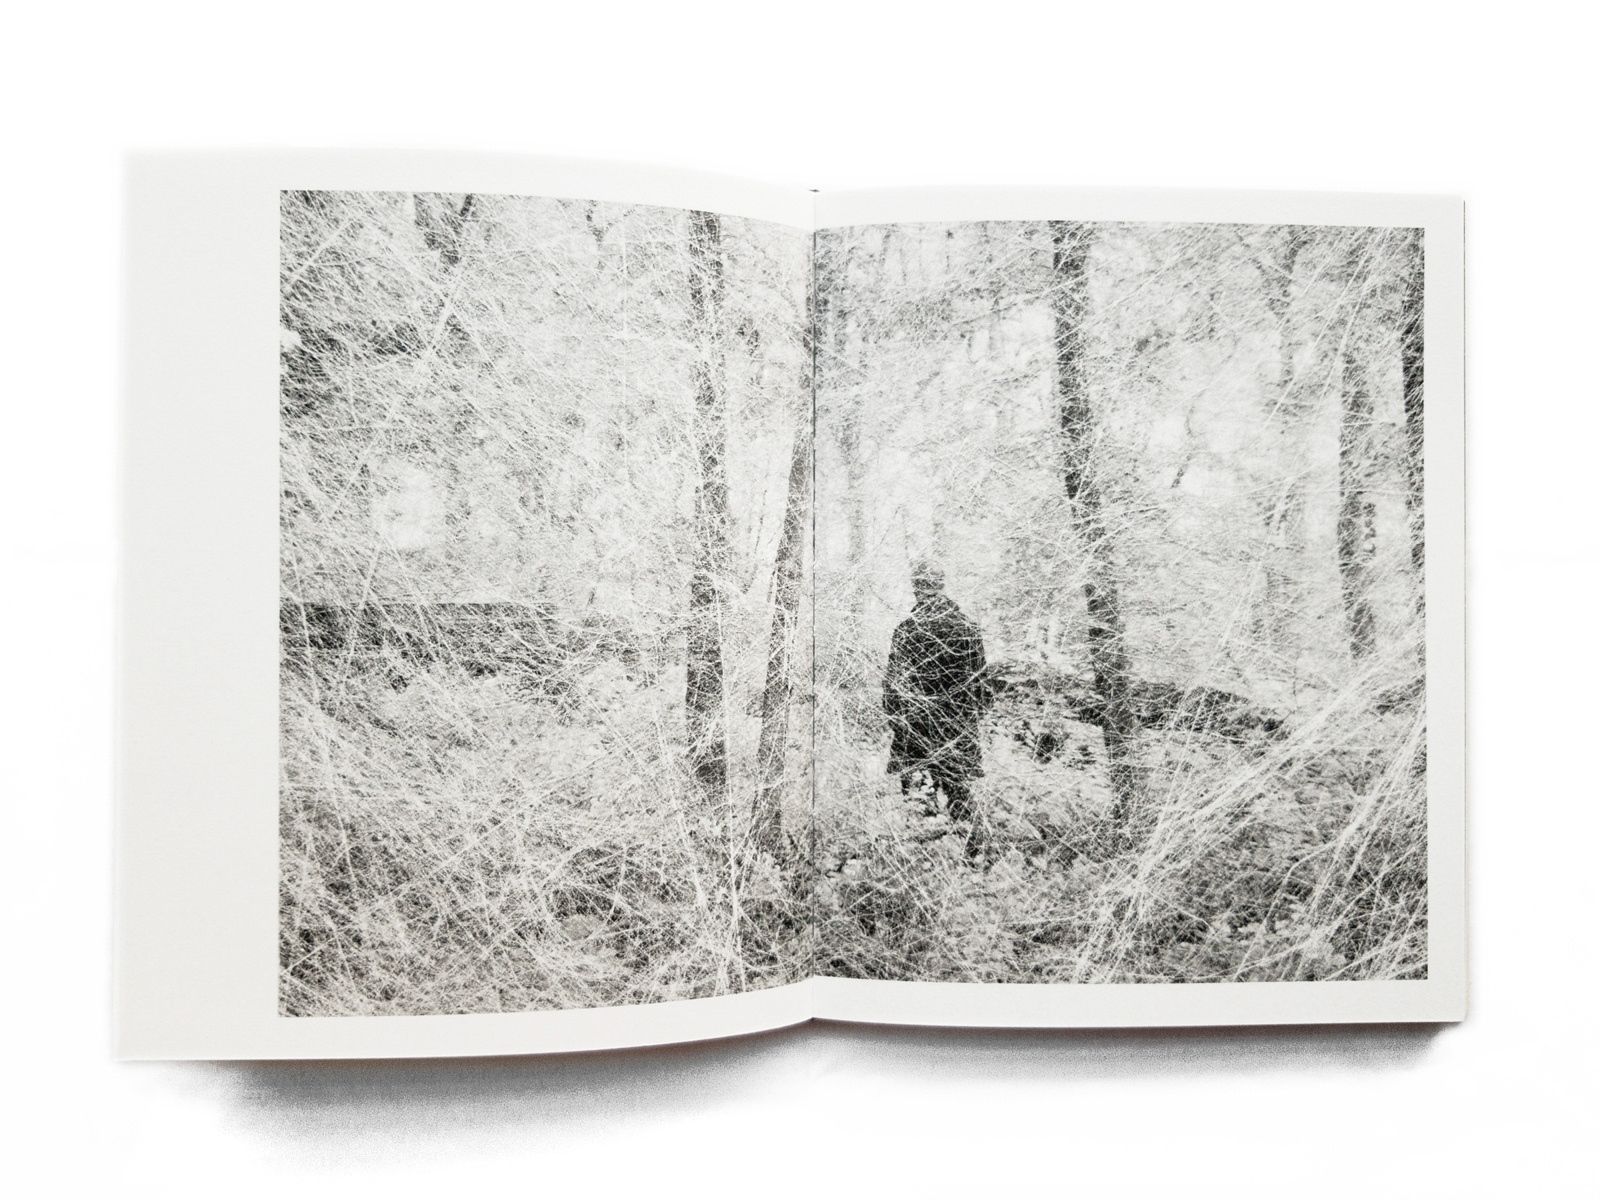 © Amani Willett, spread from the book, The Disappearance of Joseph Plummer